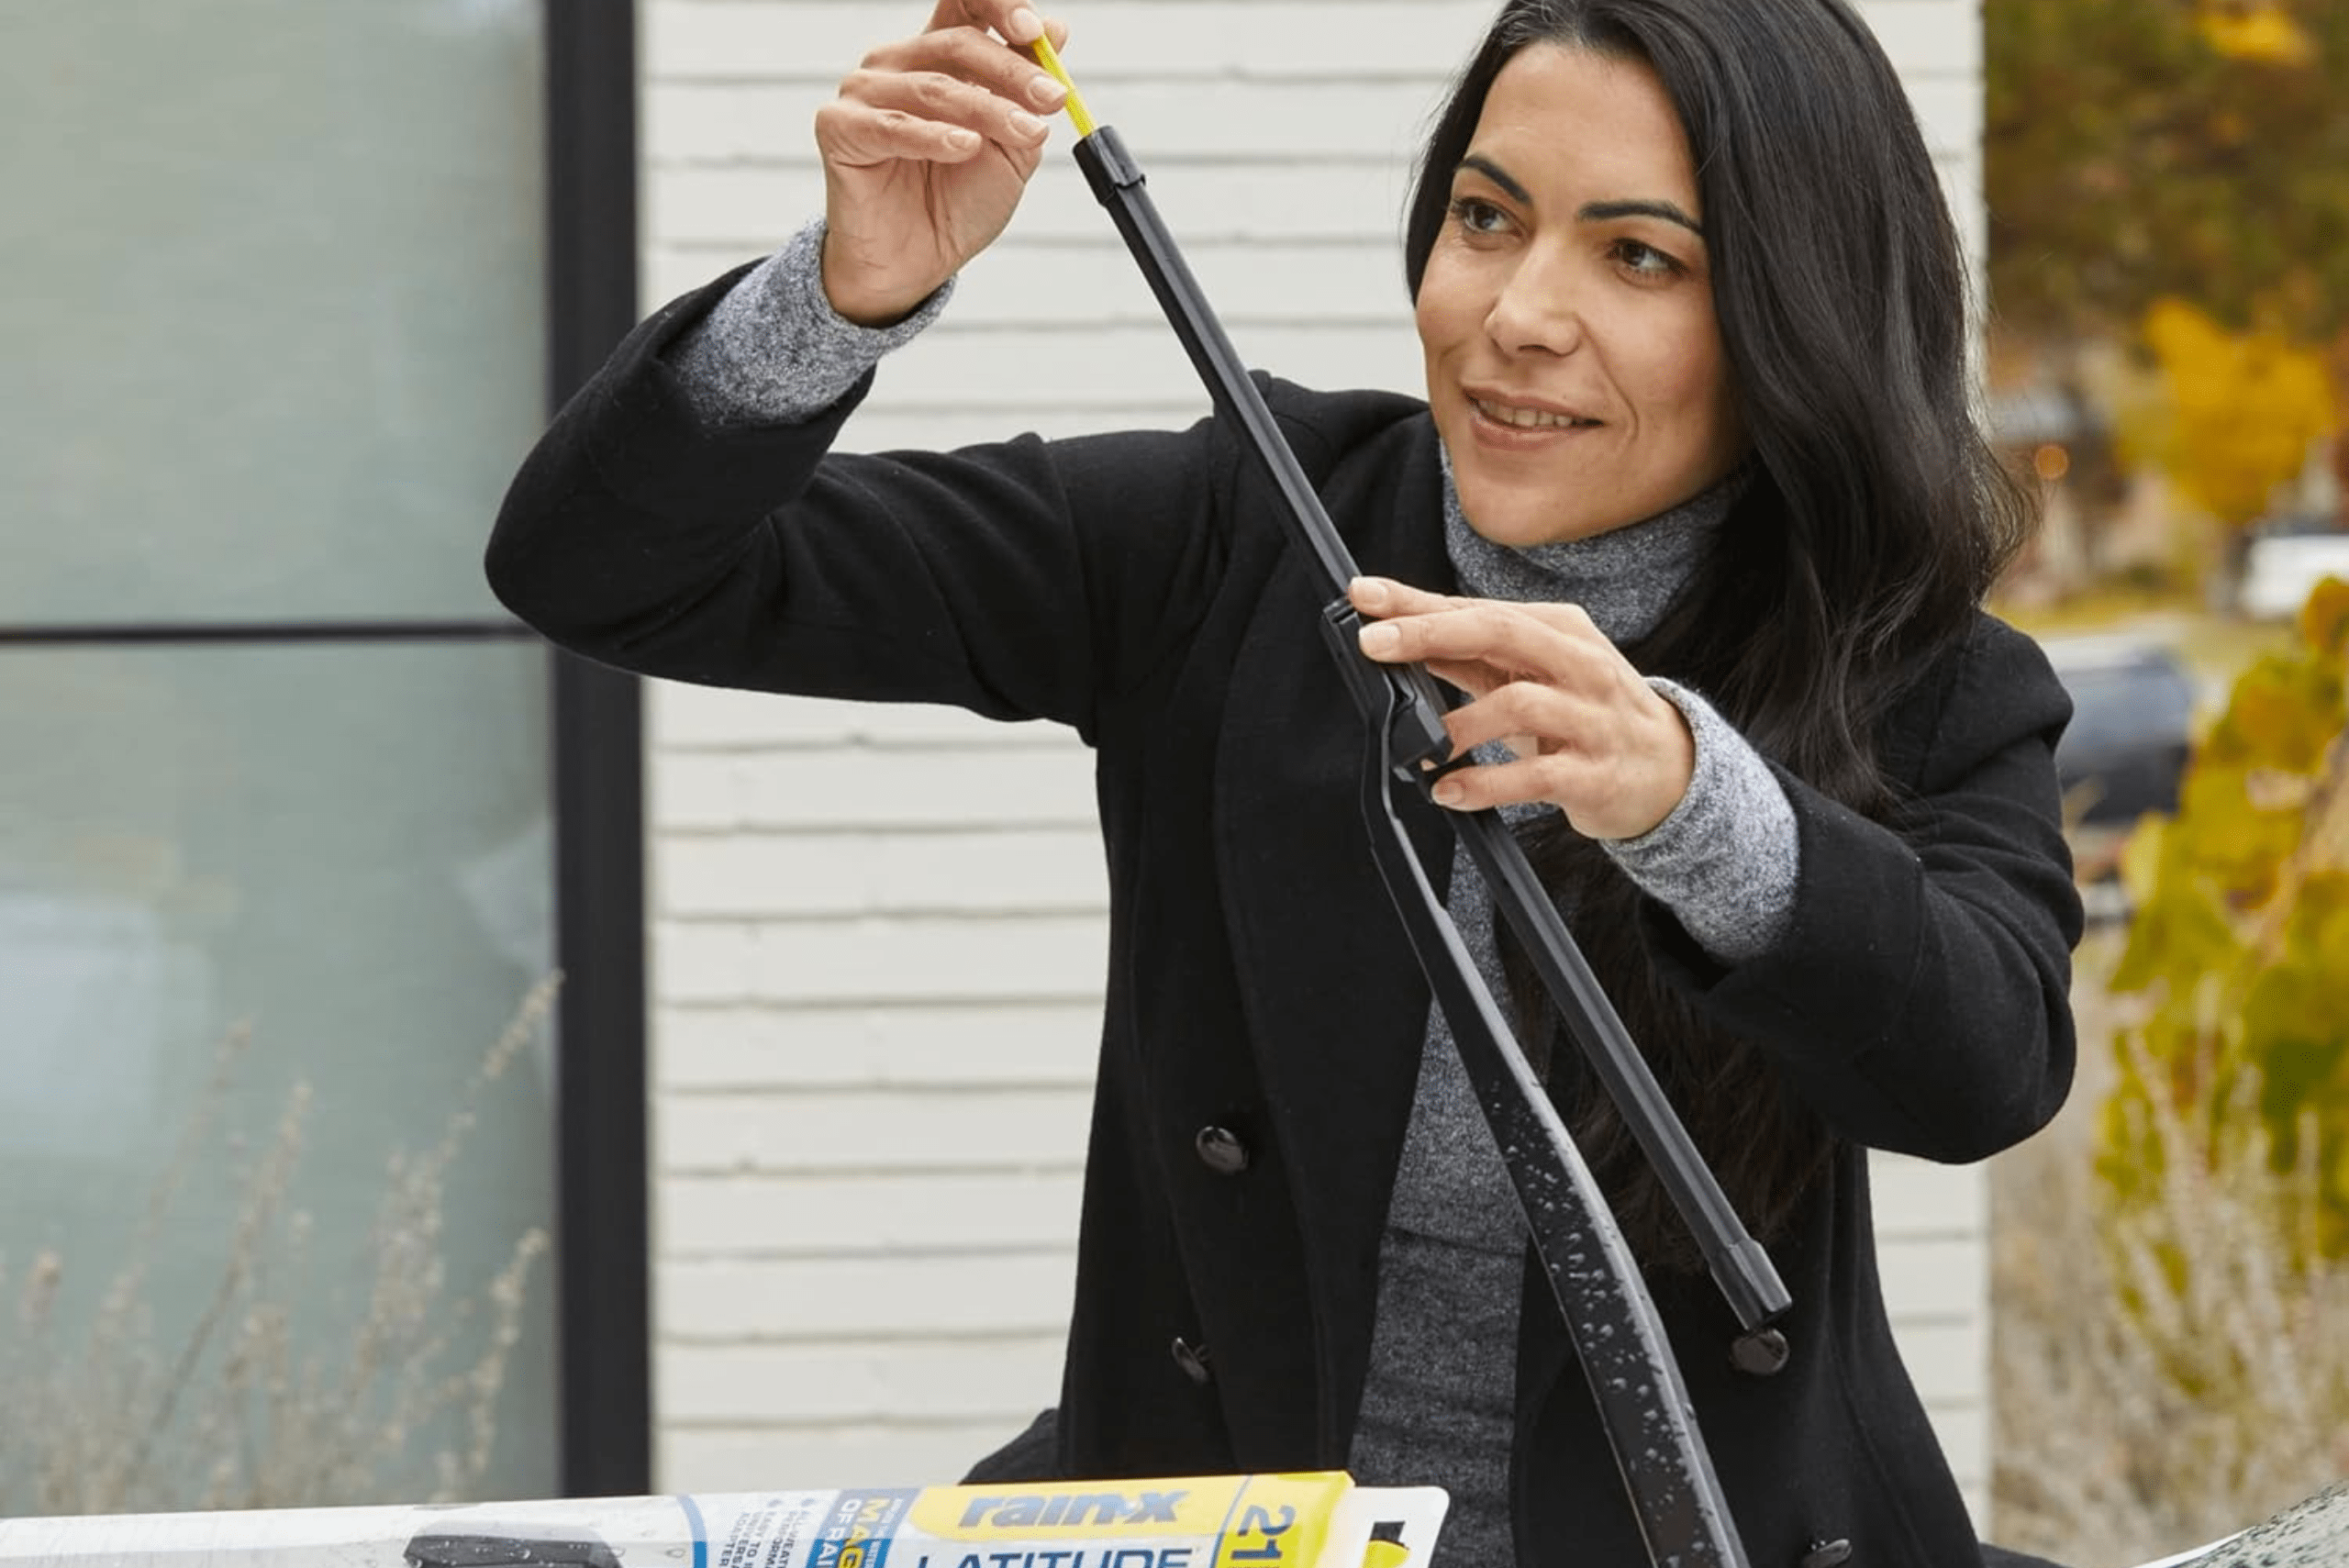 Woman removing protective shipping cover from wiper blade.